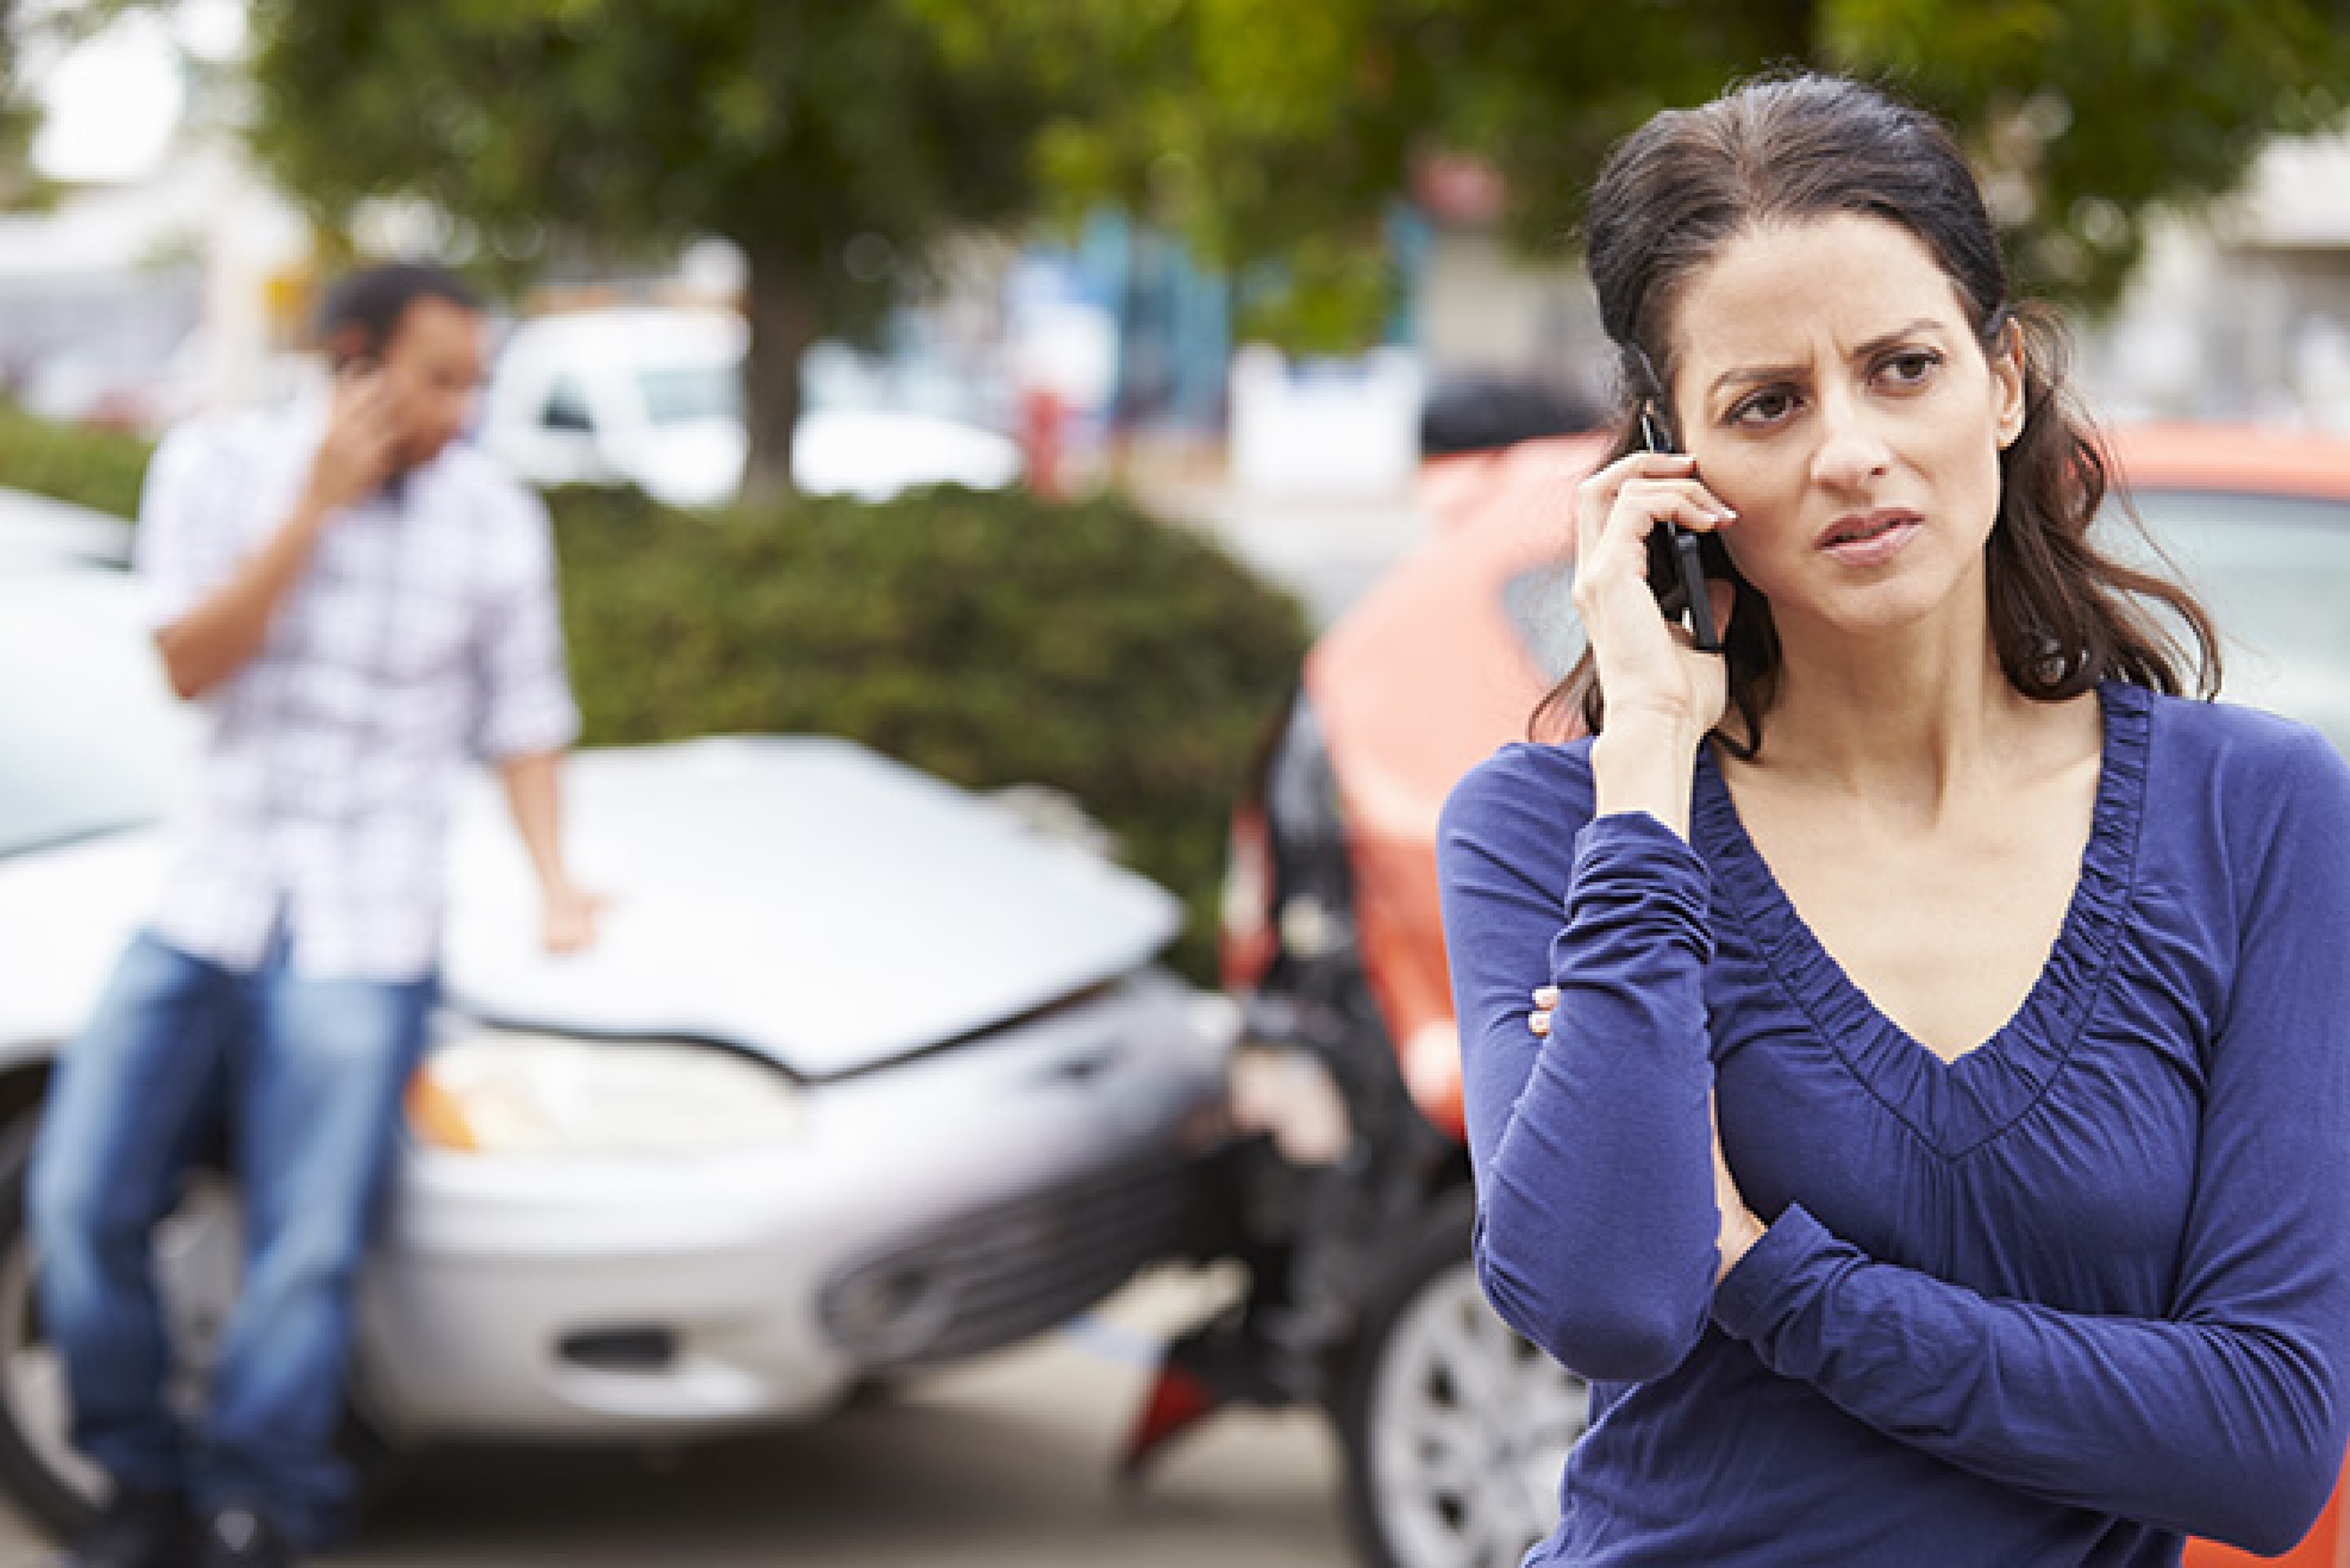 c5180a55/worried woman calling police after accident jpg